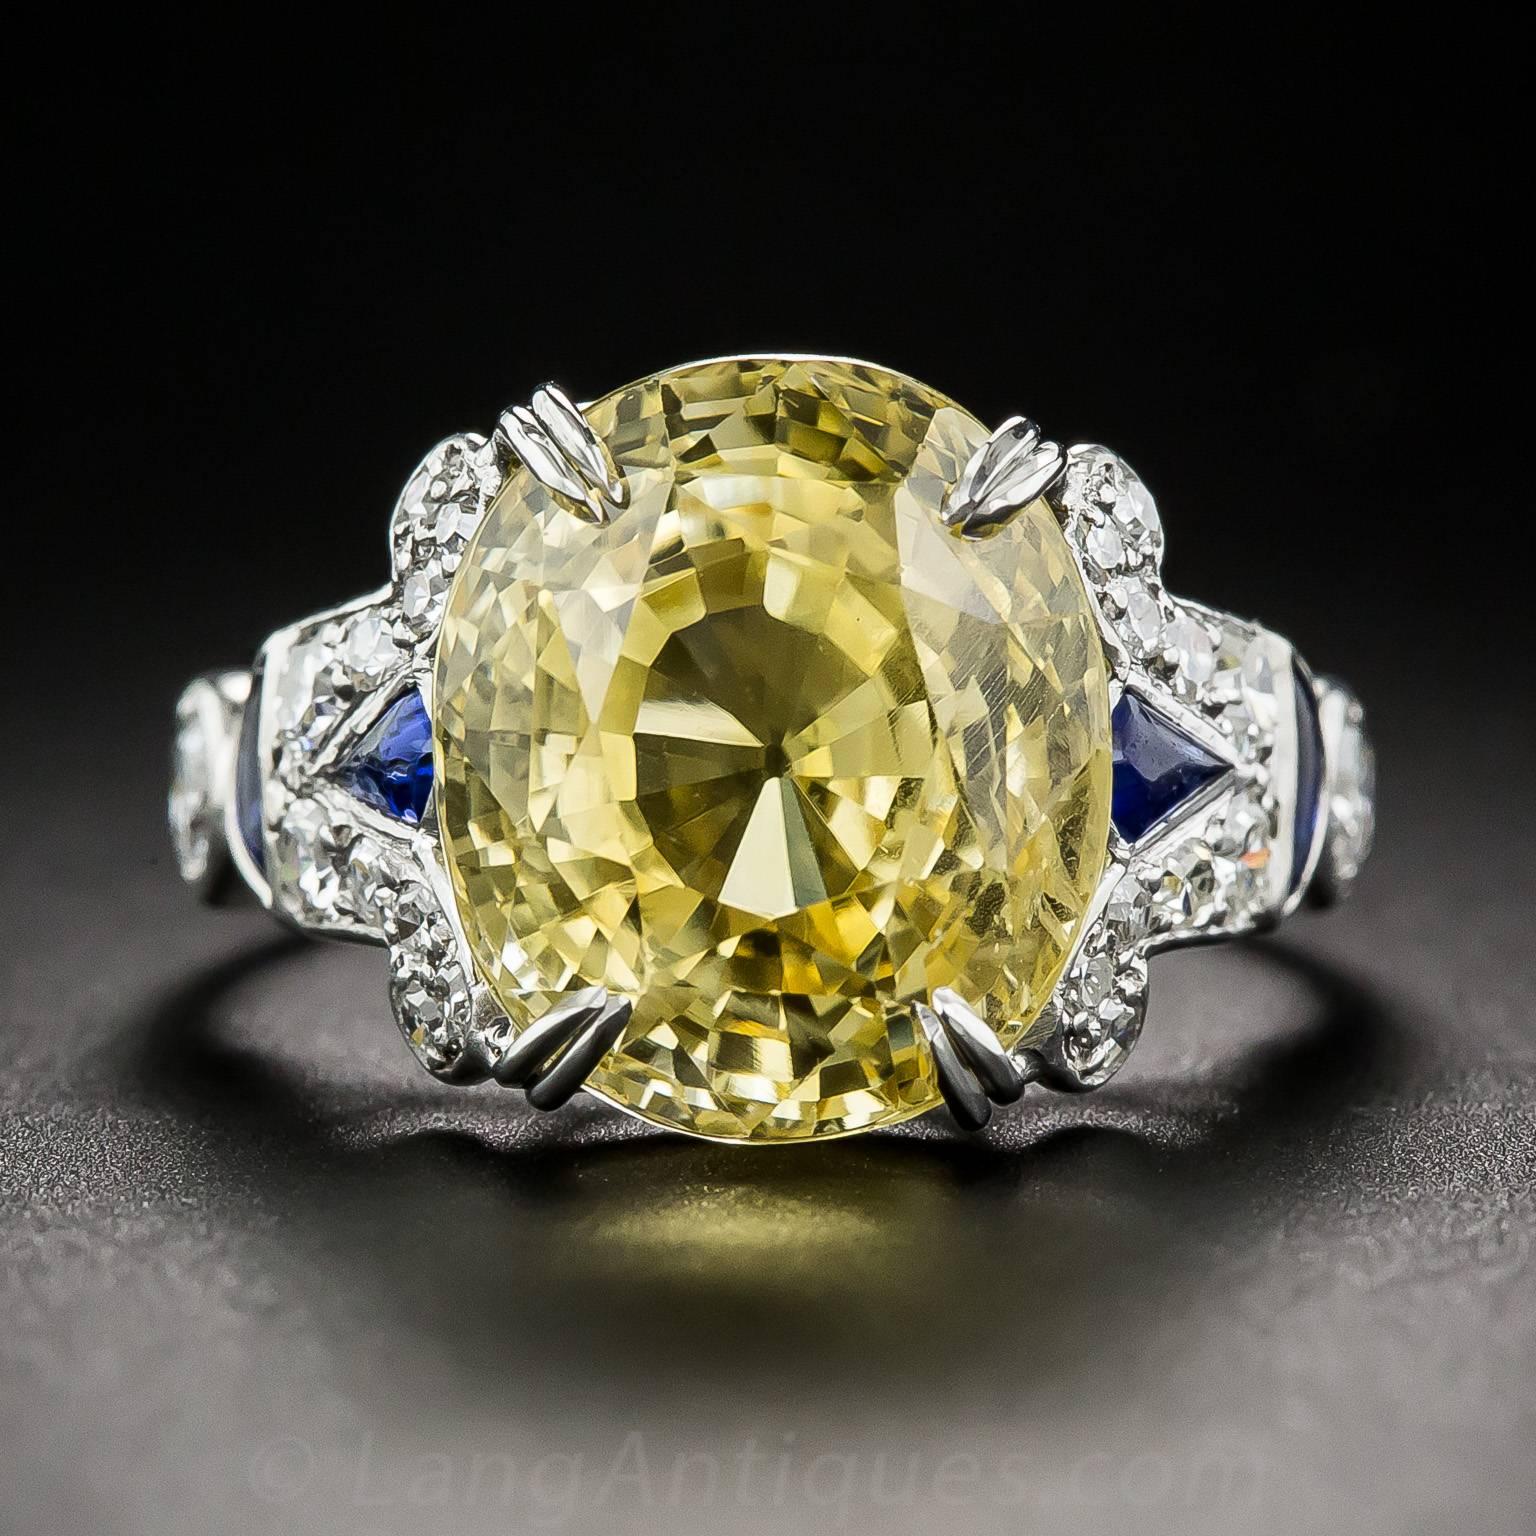 Eternal sunshine on your finger! An entrancing, electric yellow, natural, no-heat Ceylon sapphire, weighing 12.03 carats, radiates from within its Art Deco style setting, in this rare and wonderful Jazz Age inspired jewel. In addition to four split